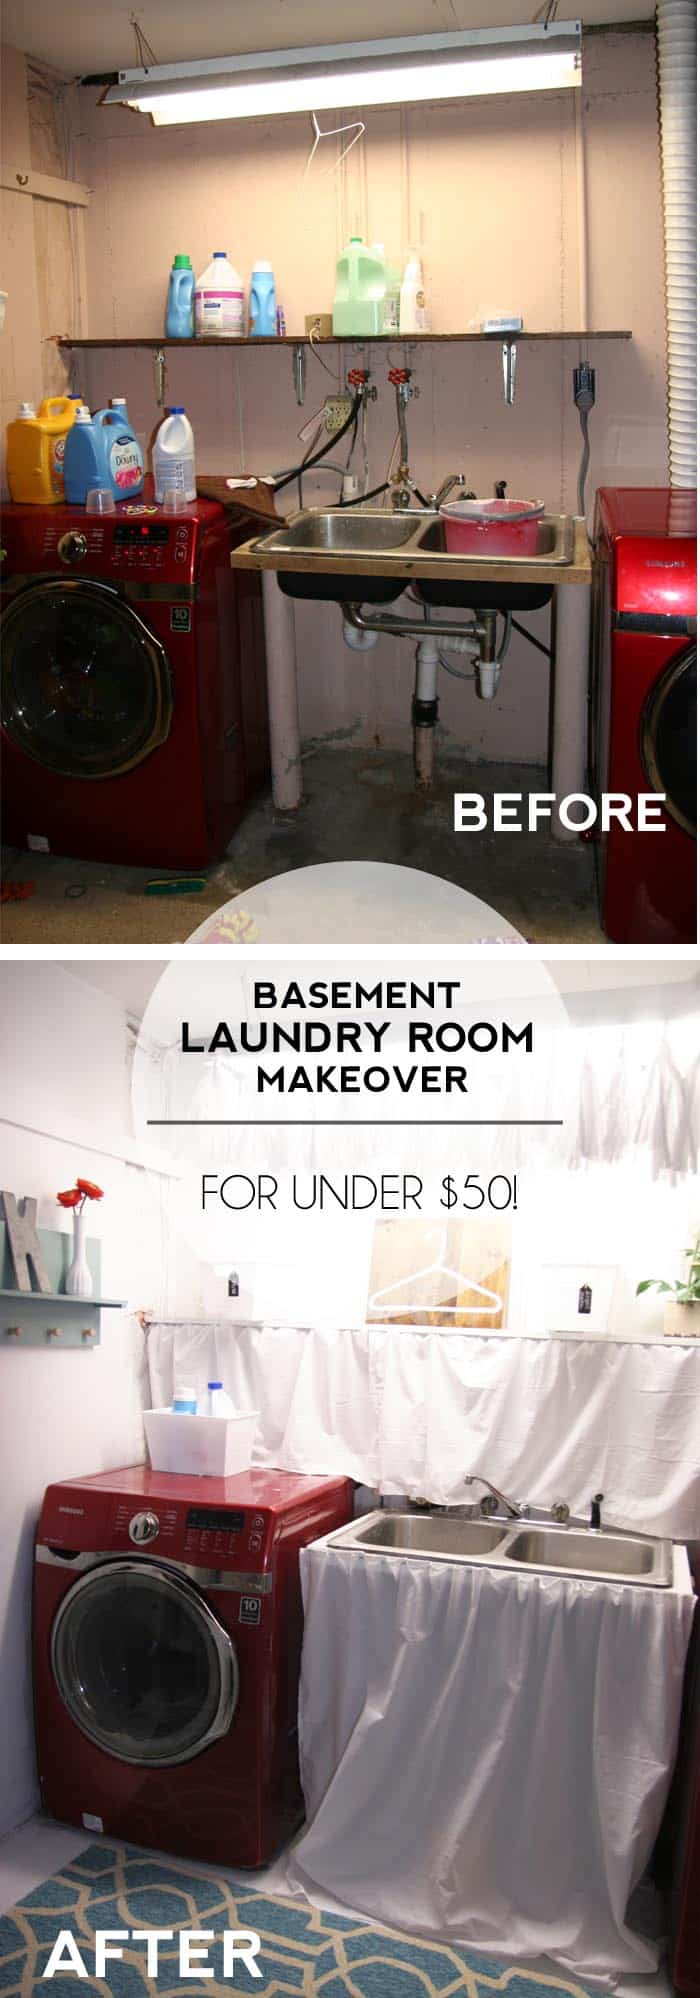 Basement Laundry Room Makeover! Transform your unfinished basement laundry room with a tiny budget using these laundry room ideas and DIY's!